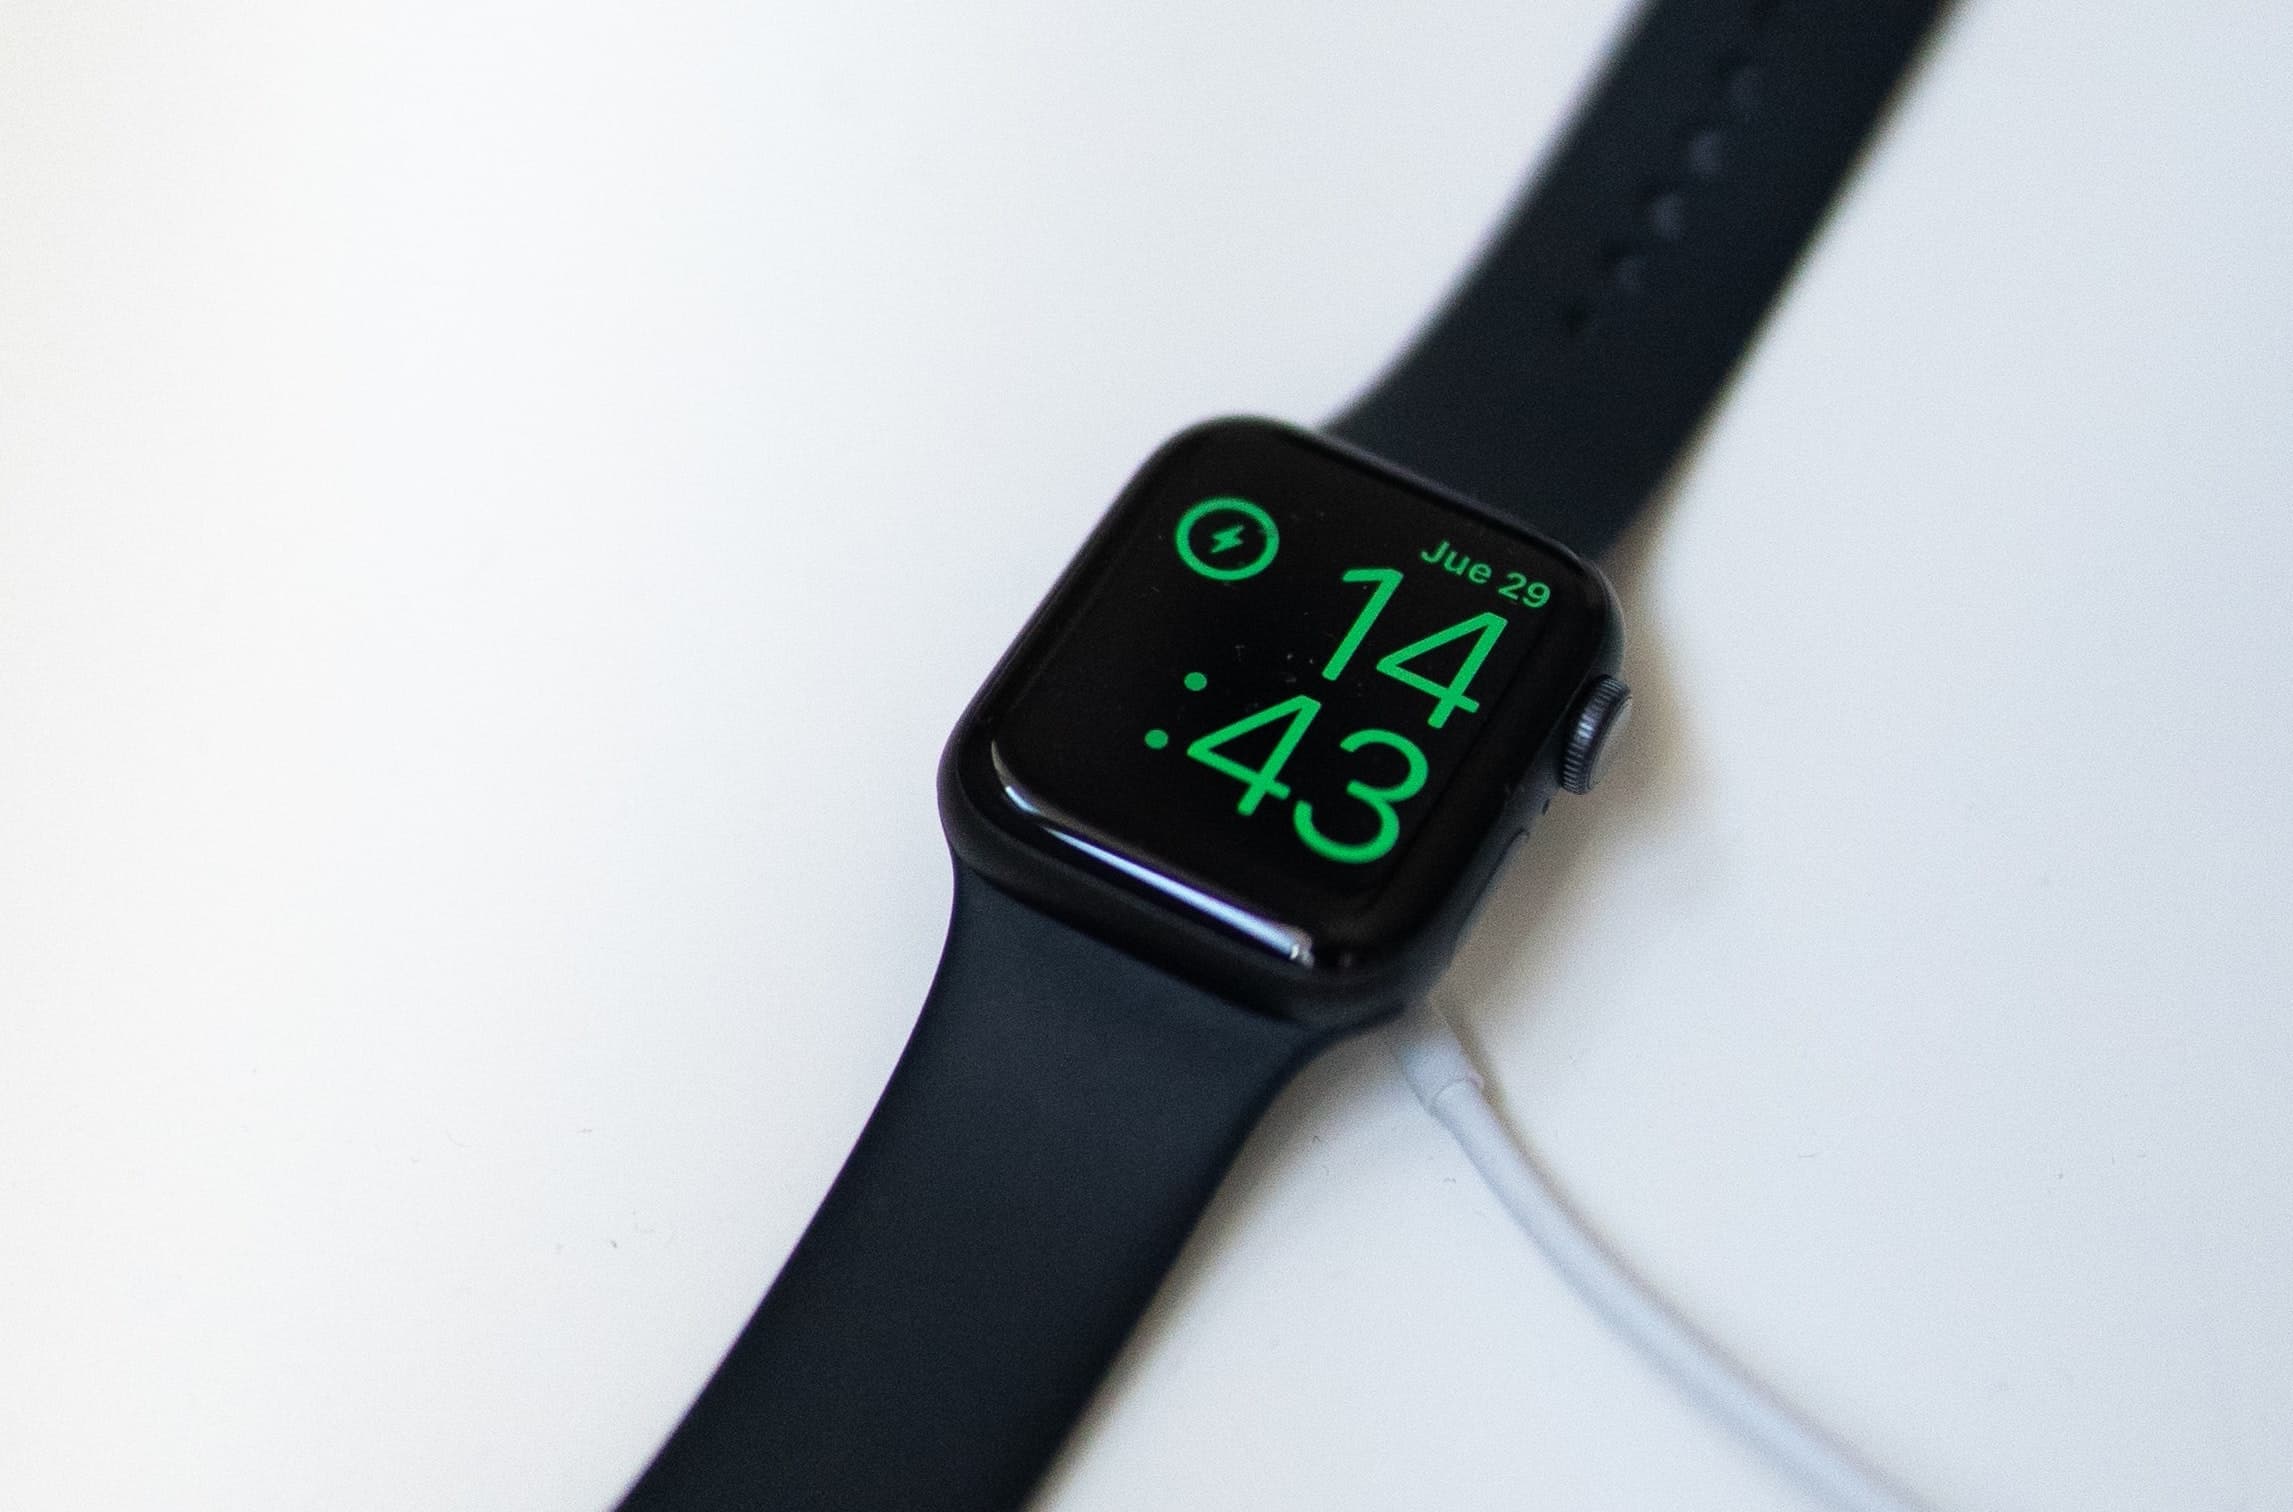 Apple Watch connected to its charger